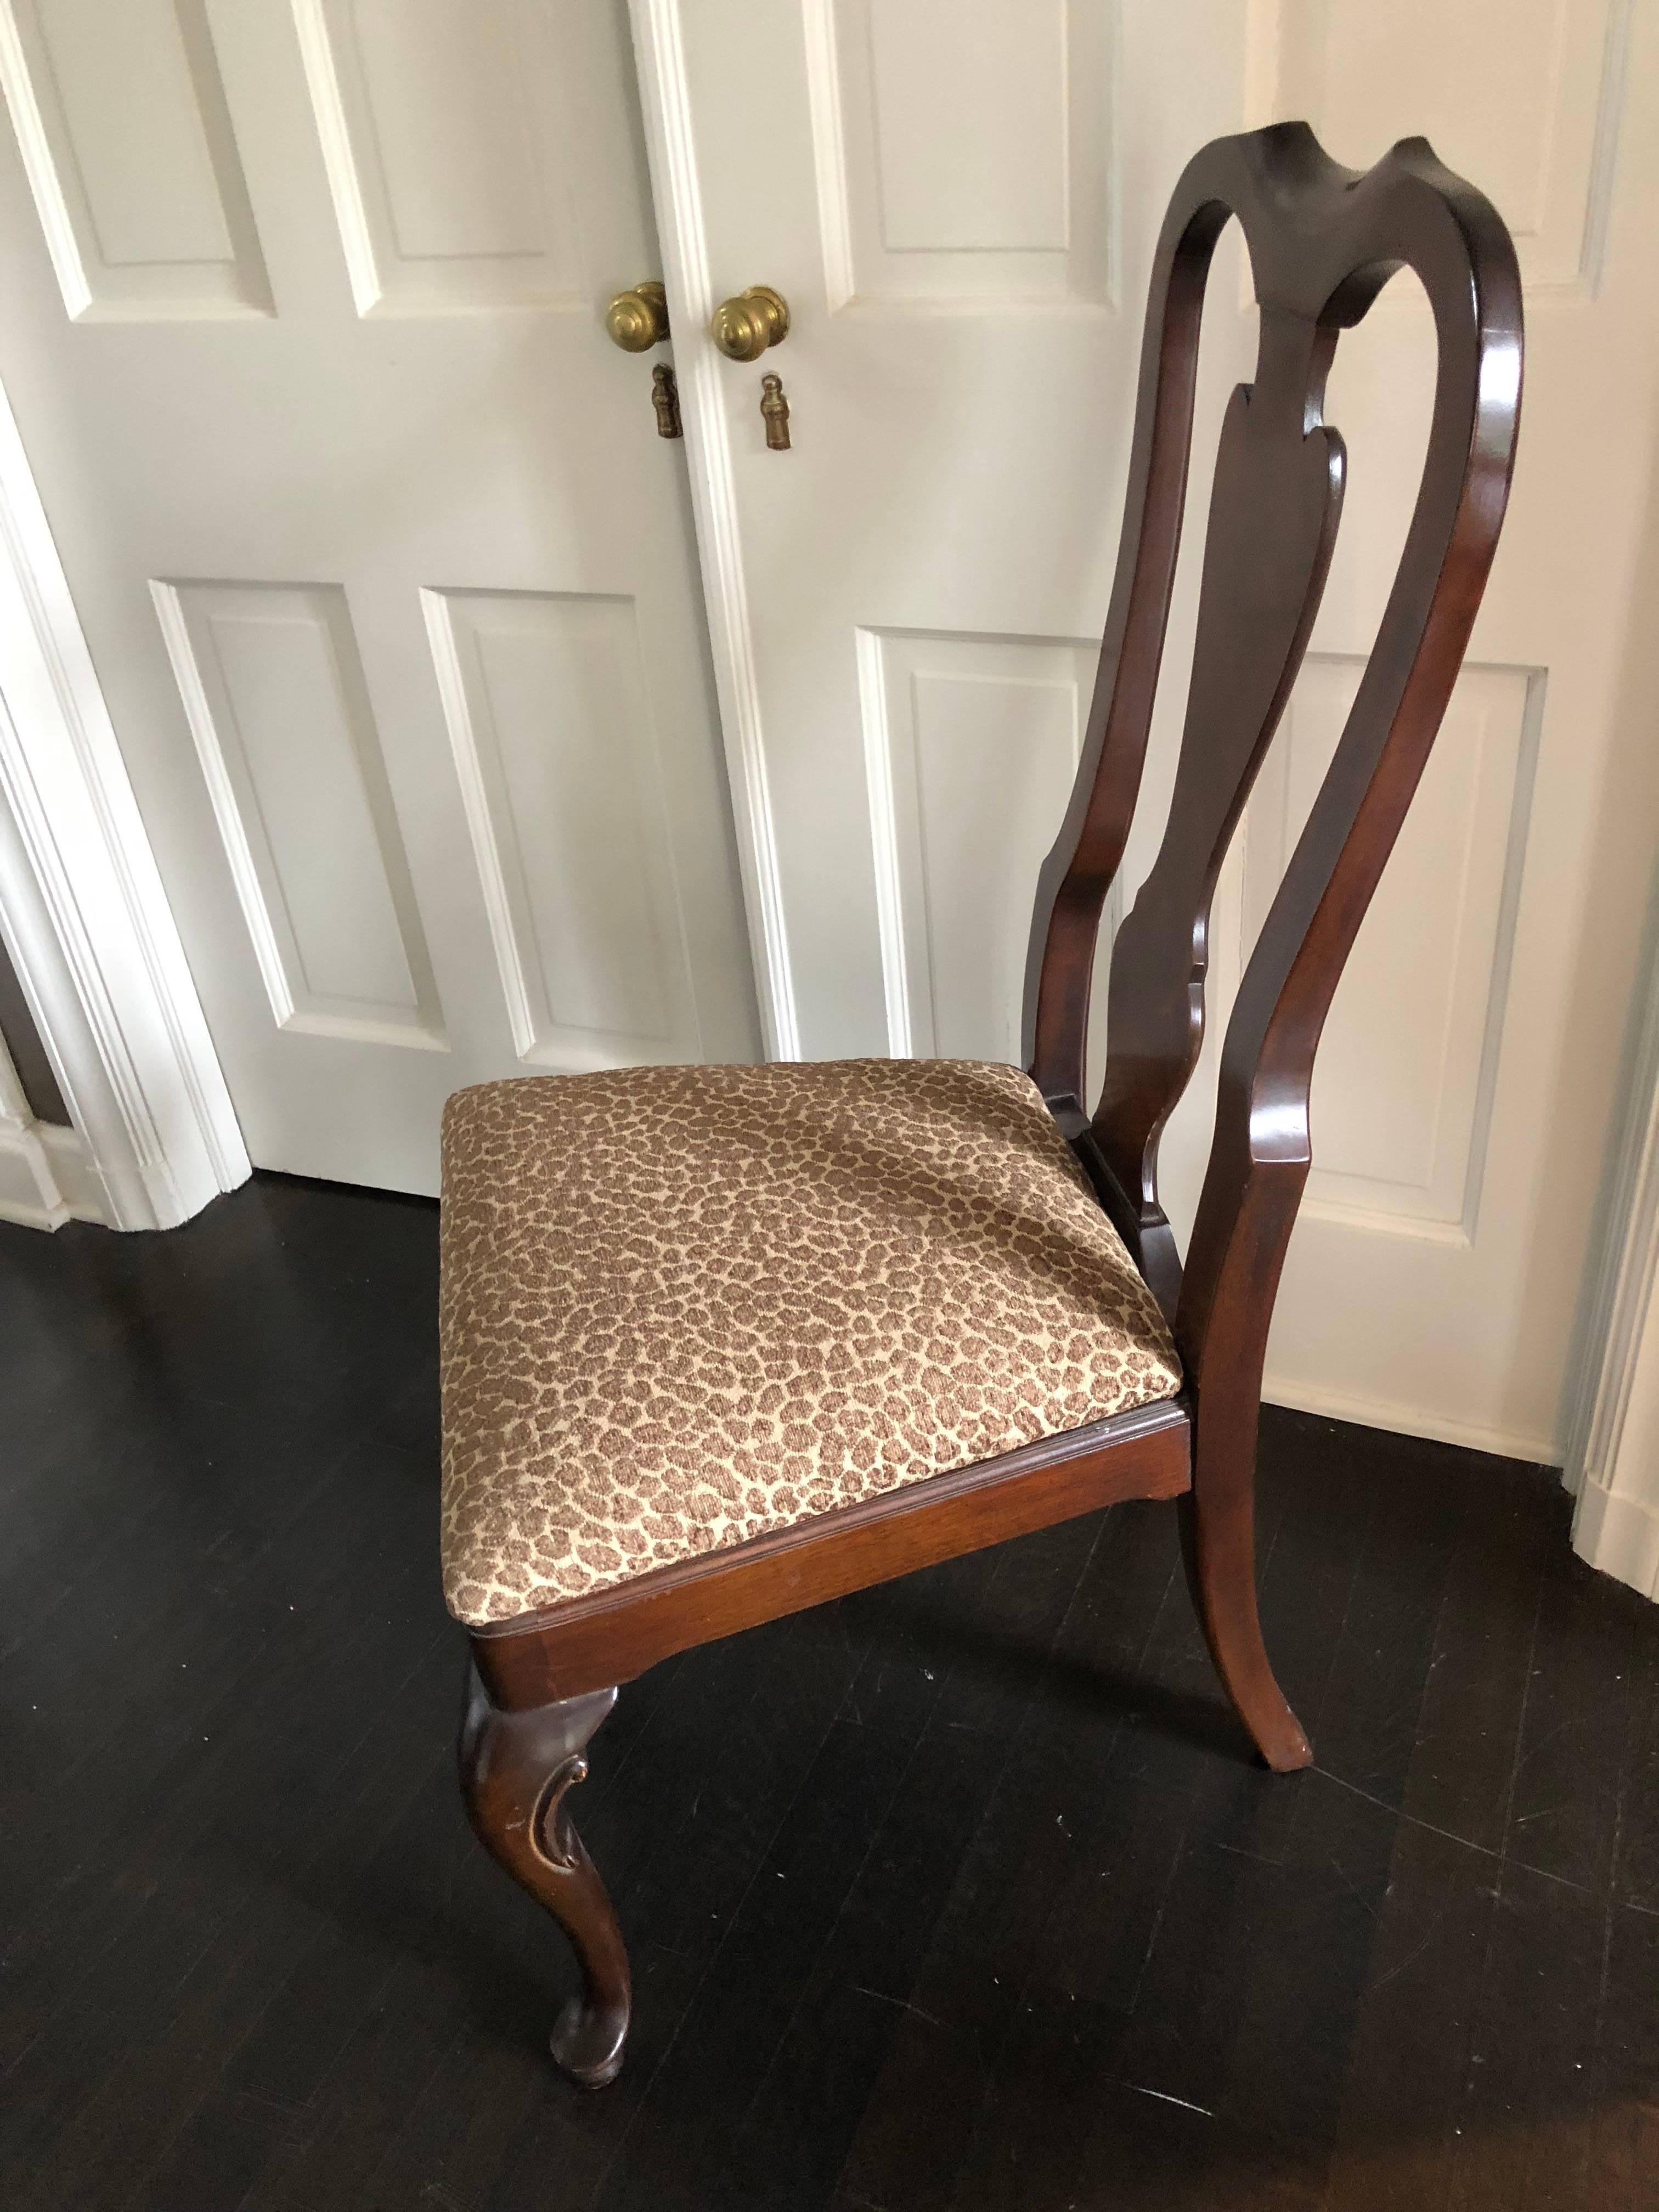 Beautiful set of ten Drexel heritage armless dining room chairs in the Queen Anne style. Chairs are solid mahogany and have been newly upholstered in a designer animal print
cotton. The seat height of each chair is 18